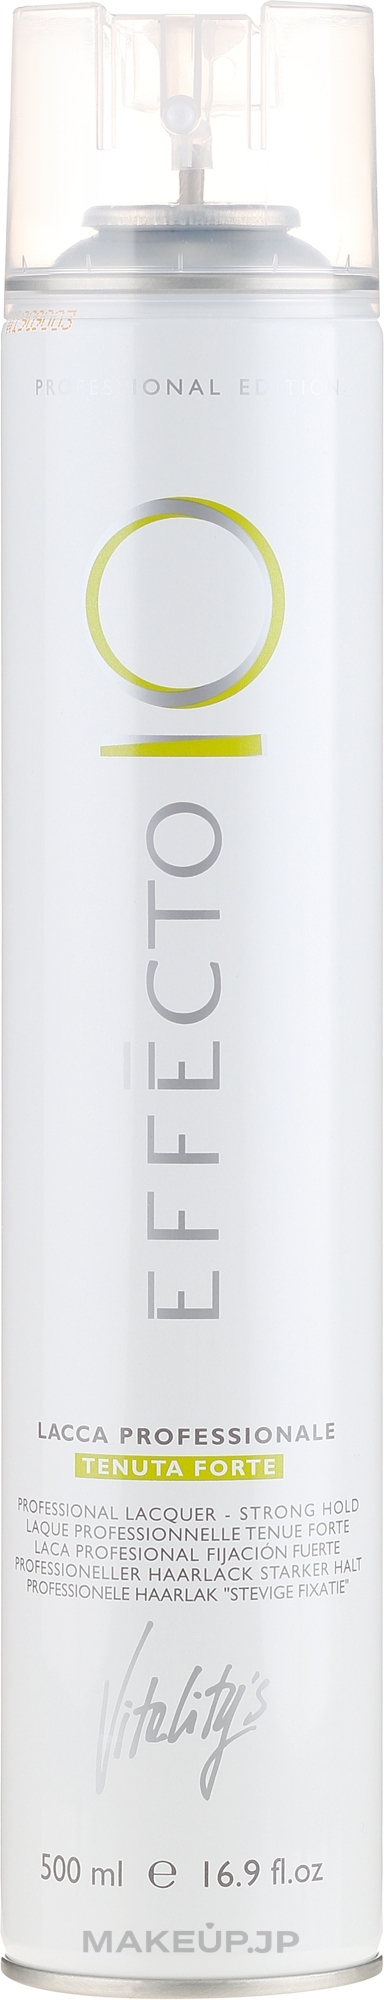 Strong Hold Hair Spray - Vitality's Effecto Lacca Professionale Tenuta Forte — photo 500 ml